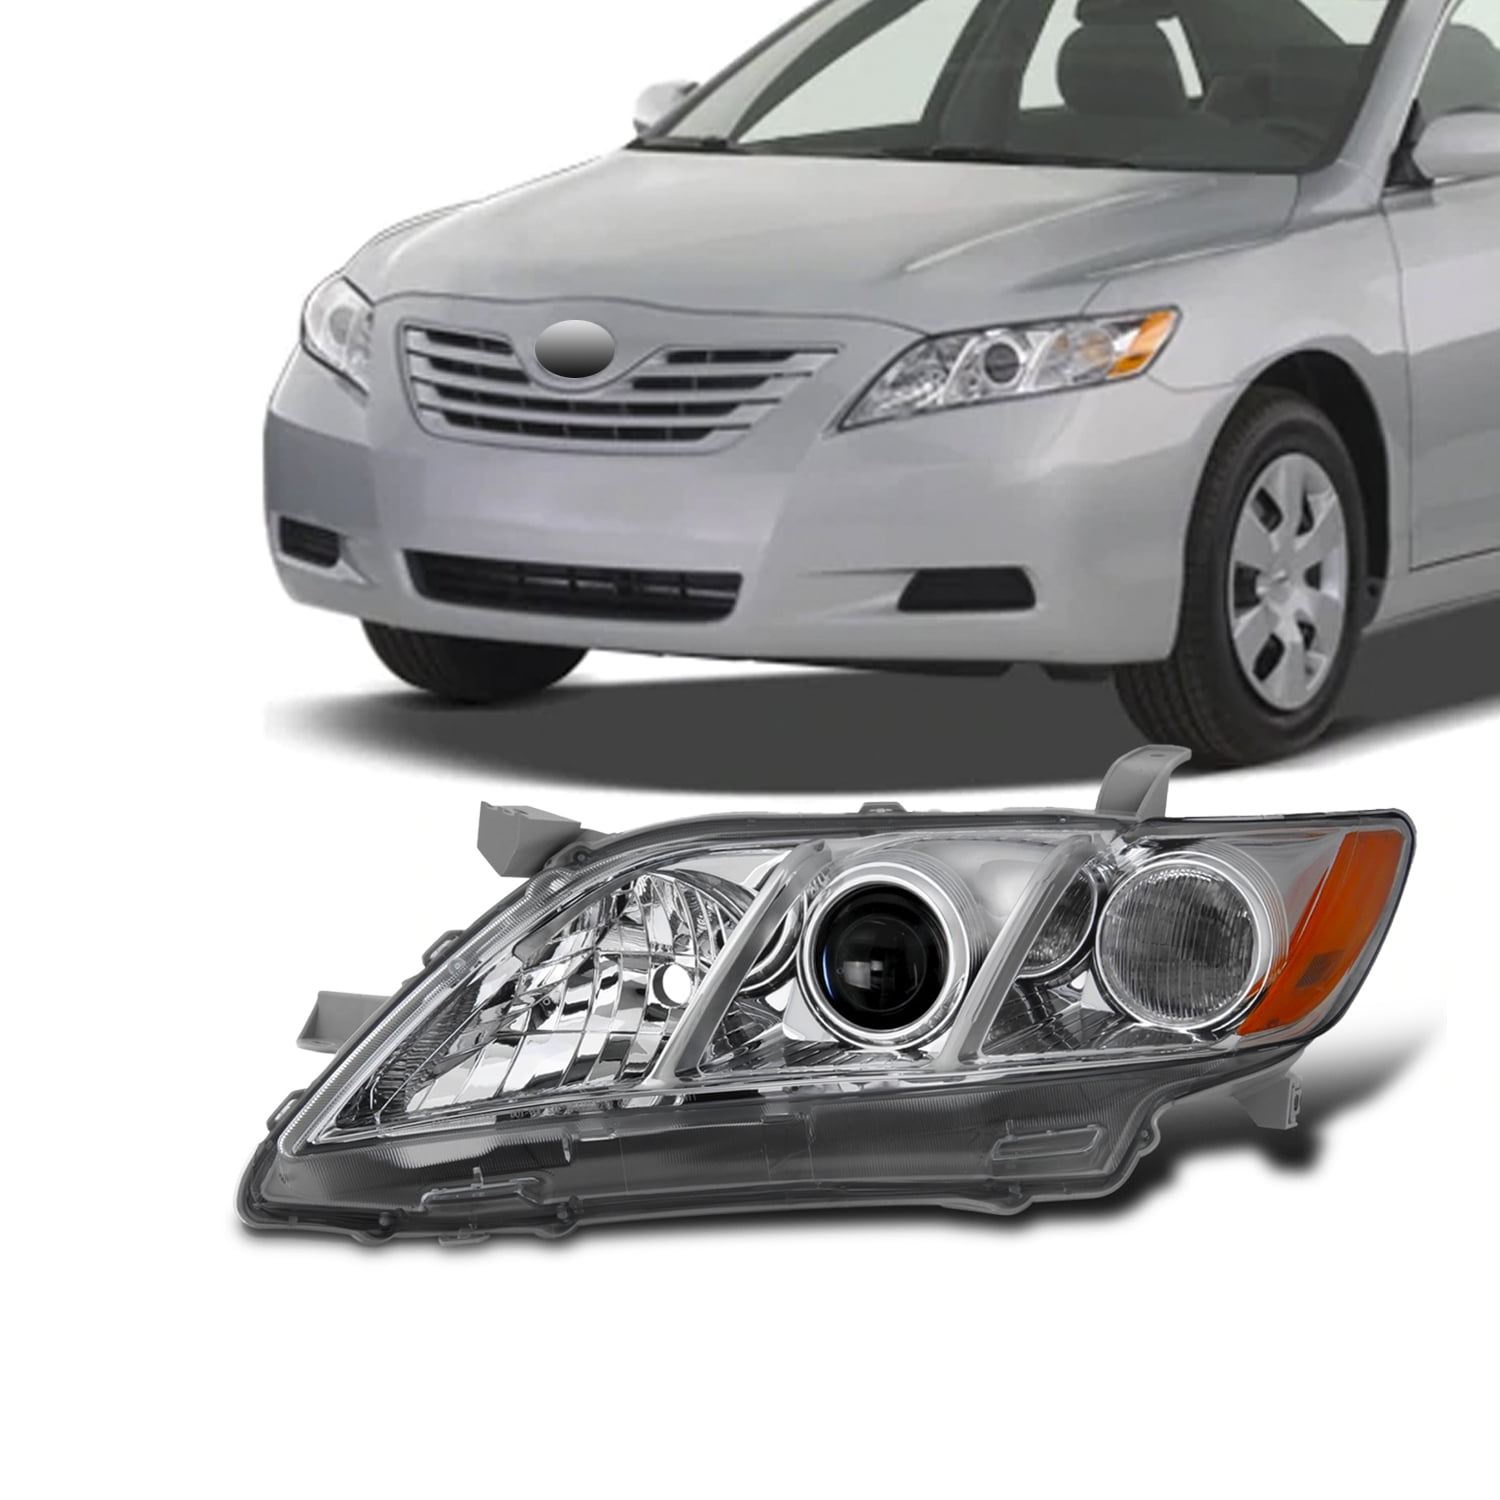 New TO2518105 Driver Side Headlight Sedan for Toyota Camry 2007-2009